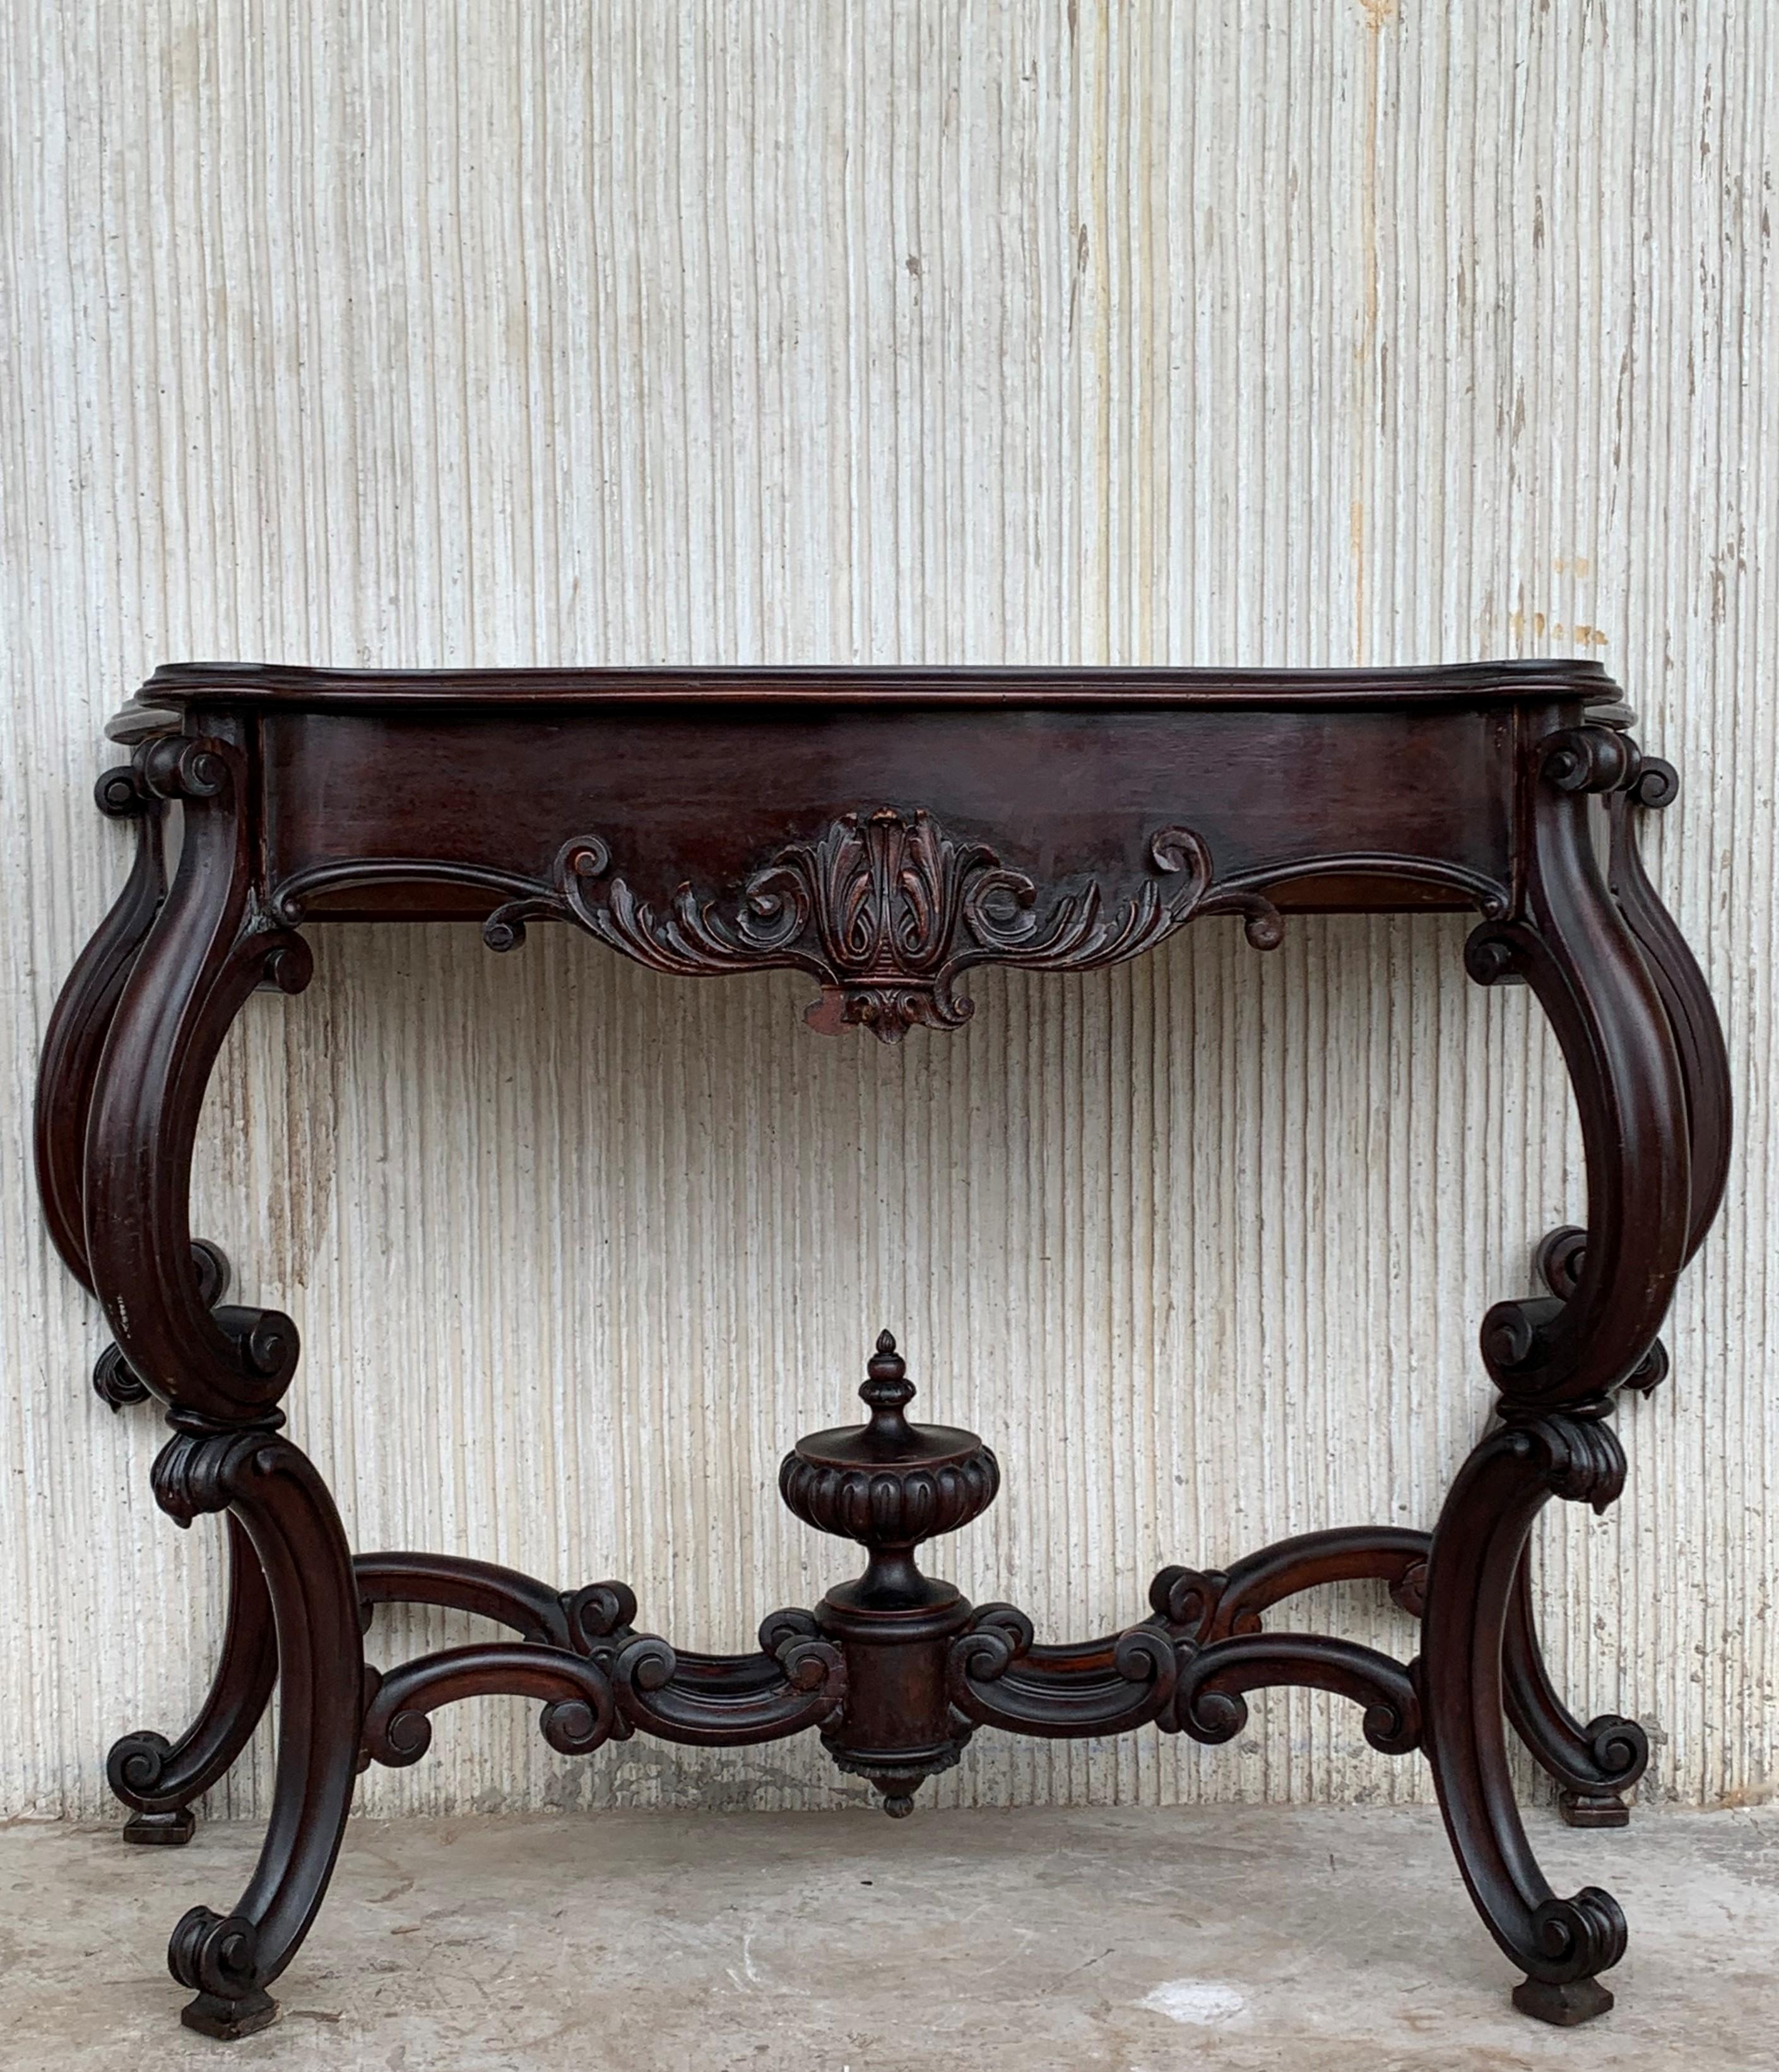 20th century French Regency carved walnut console table with drawer 

20th century French Regence style beautifully carved with leaves walnut console. Wood top with front drawer, over hand-carved frieze supported by four cabriole legs connected by